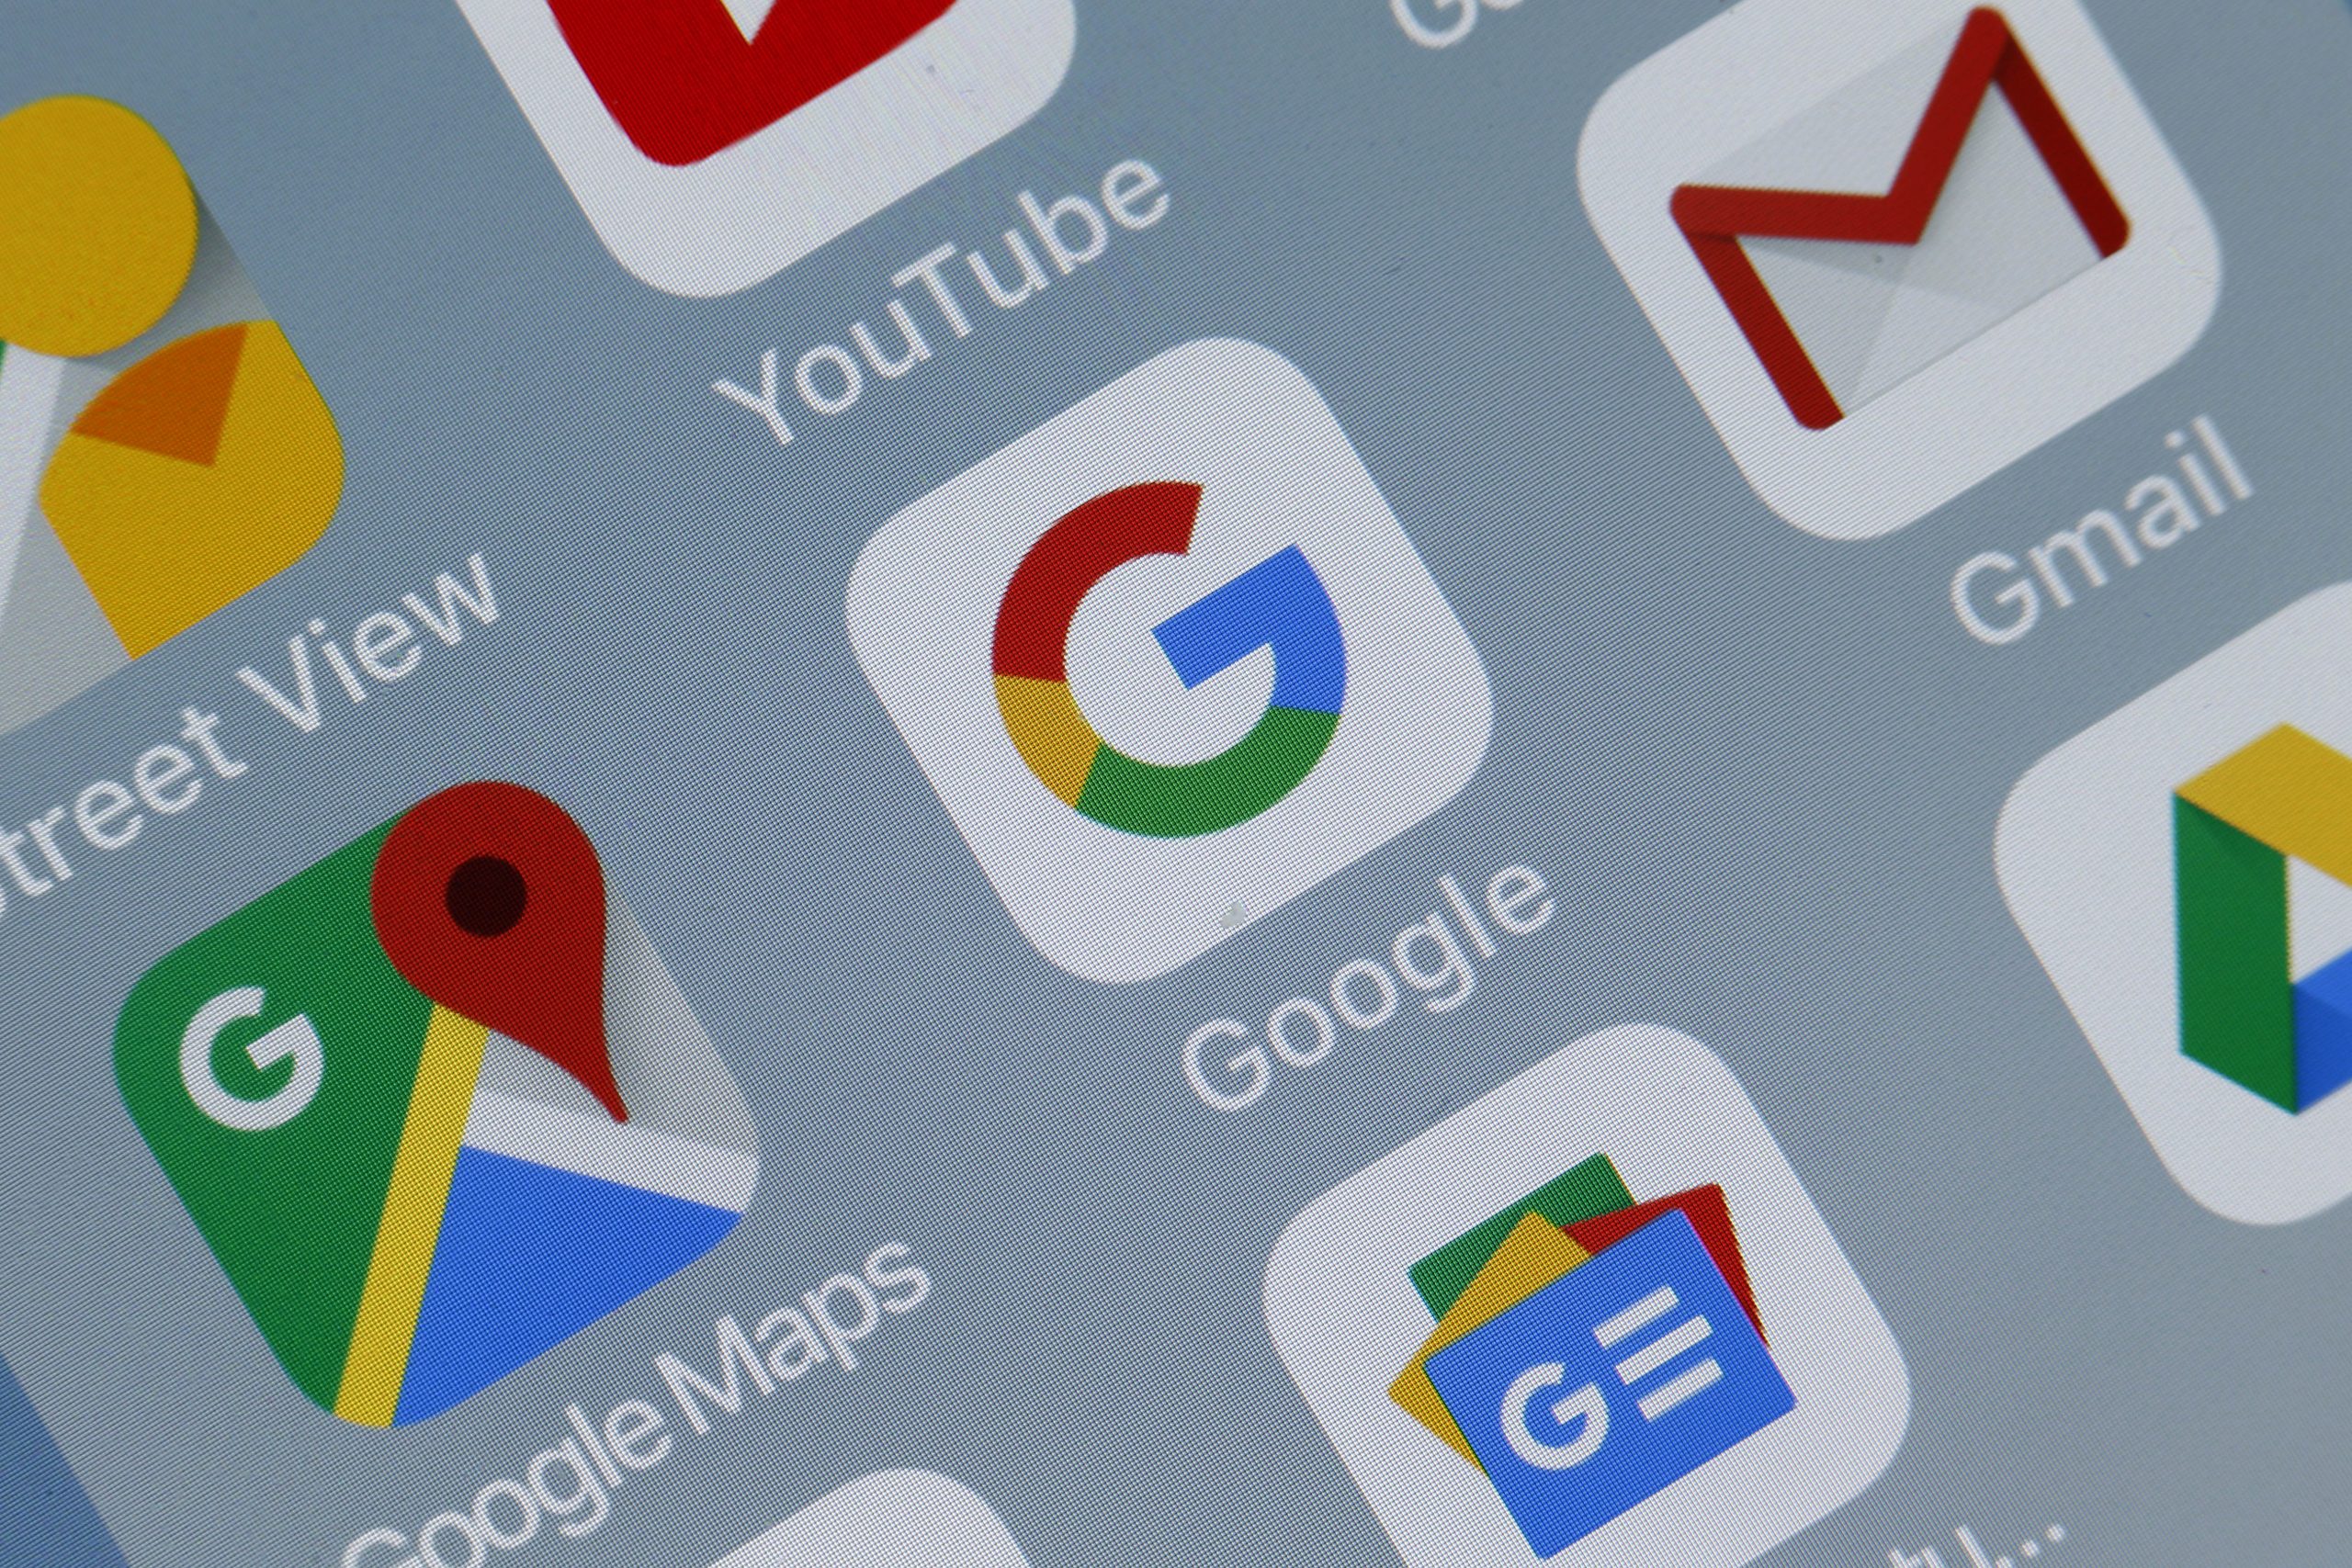 Android apps like Gmail and WebView crashes are to blame